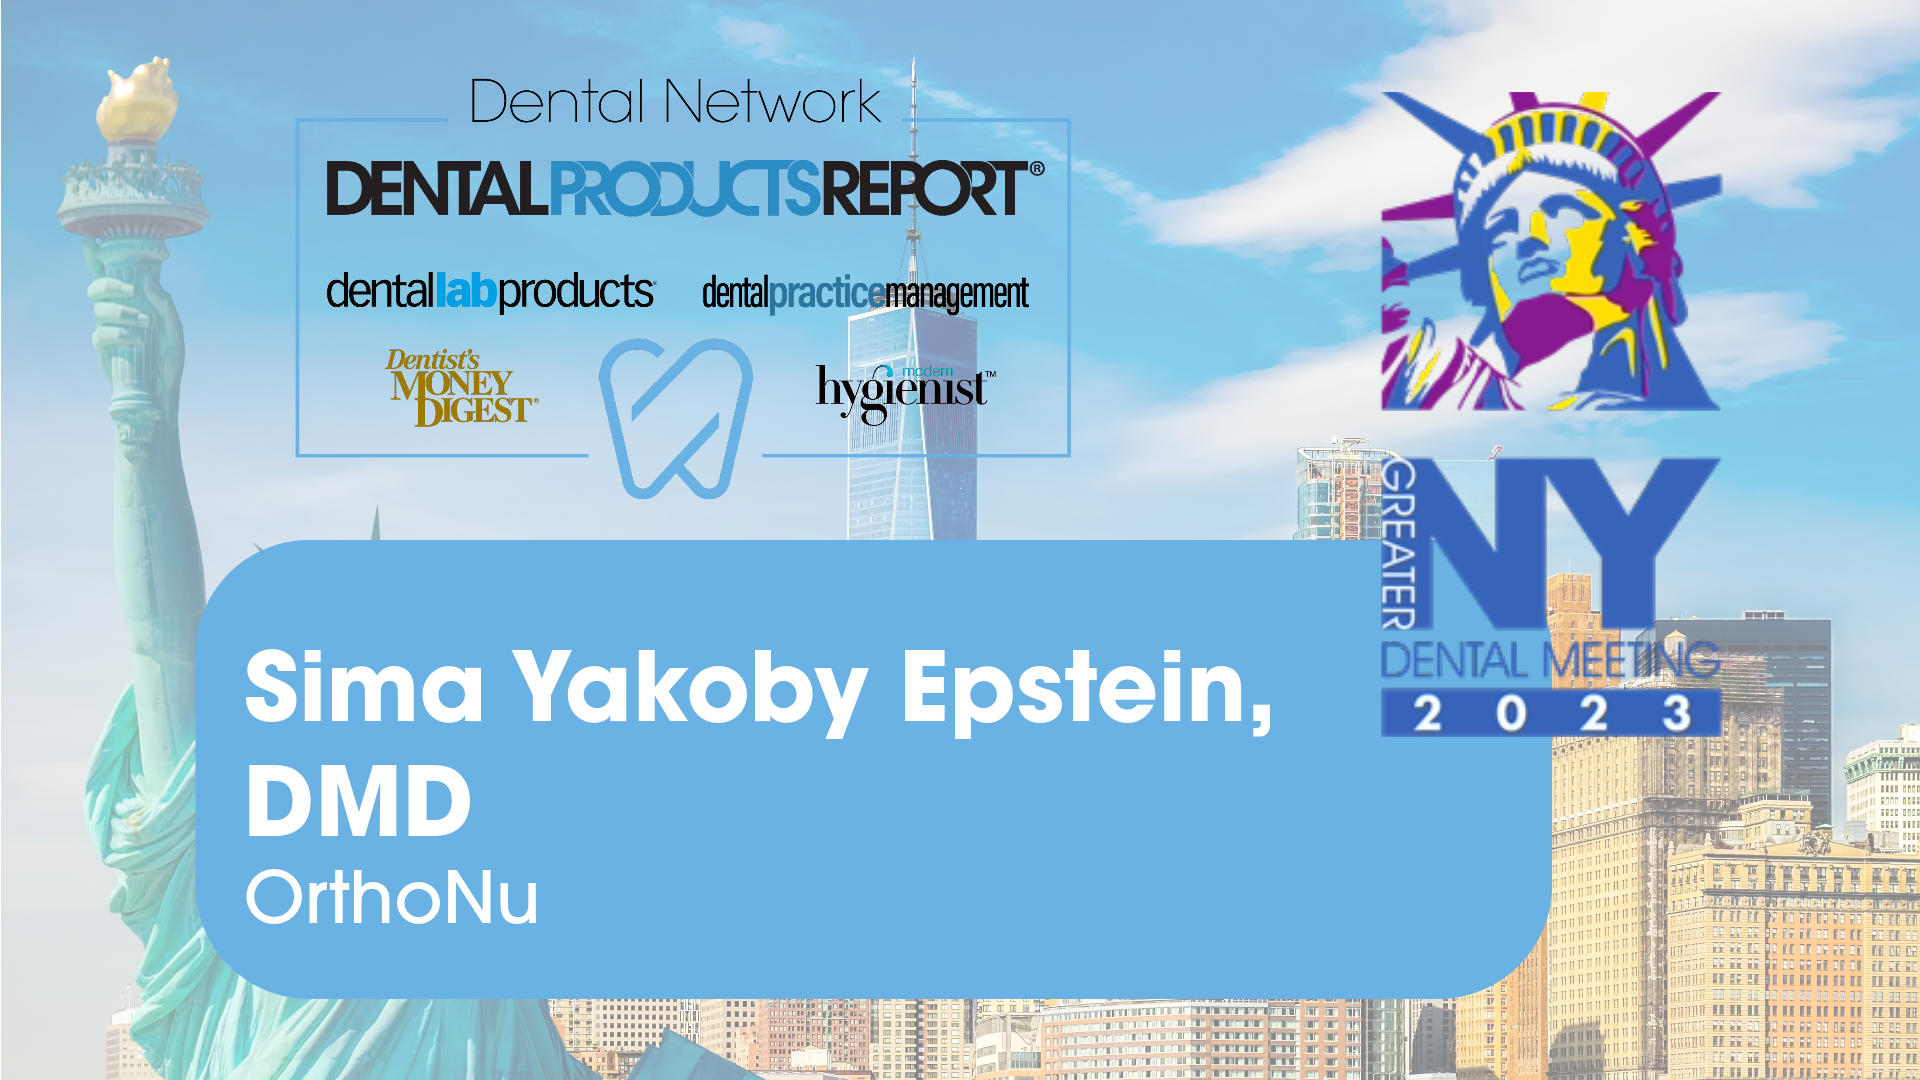 Greater New York Dental Meeting 2023 – Interview with Sima Yakoby Epstein, DMD